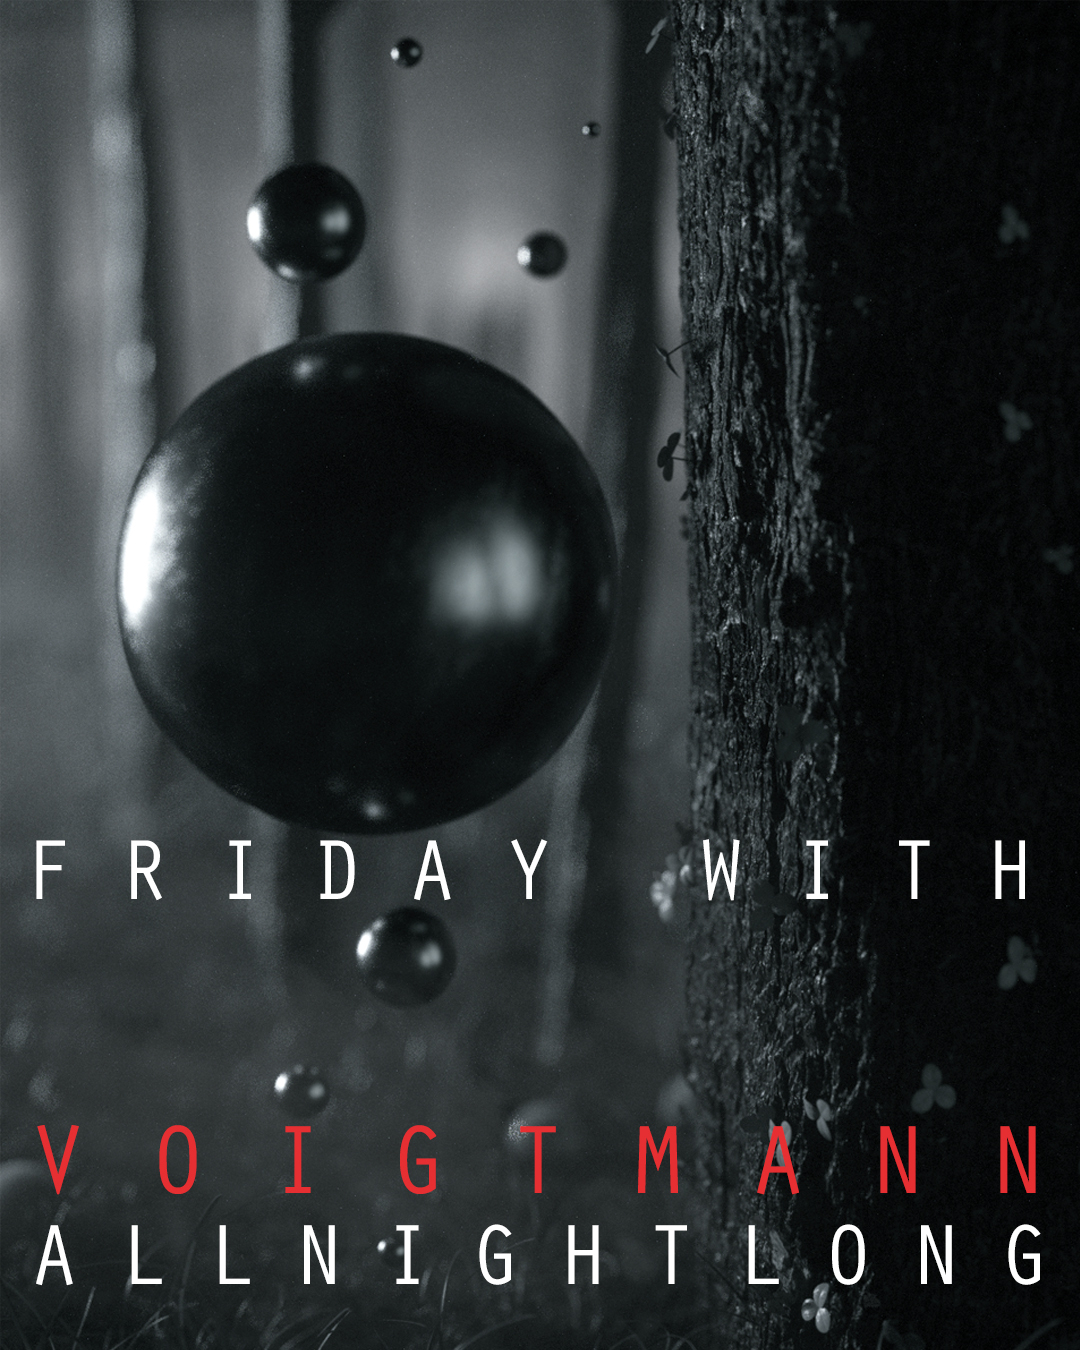 Friday with Voigtmann ALL NIGHT LONG - Flyer back